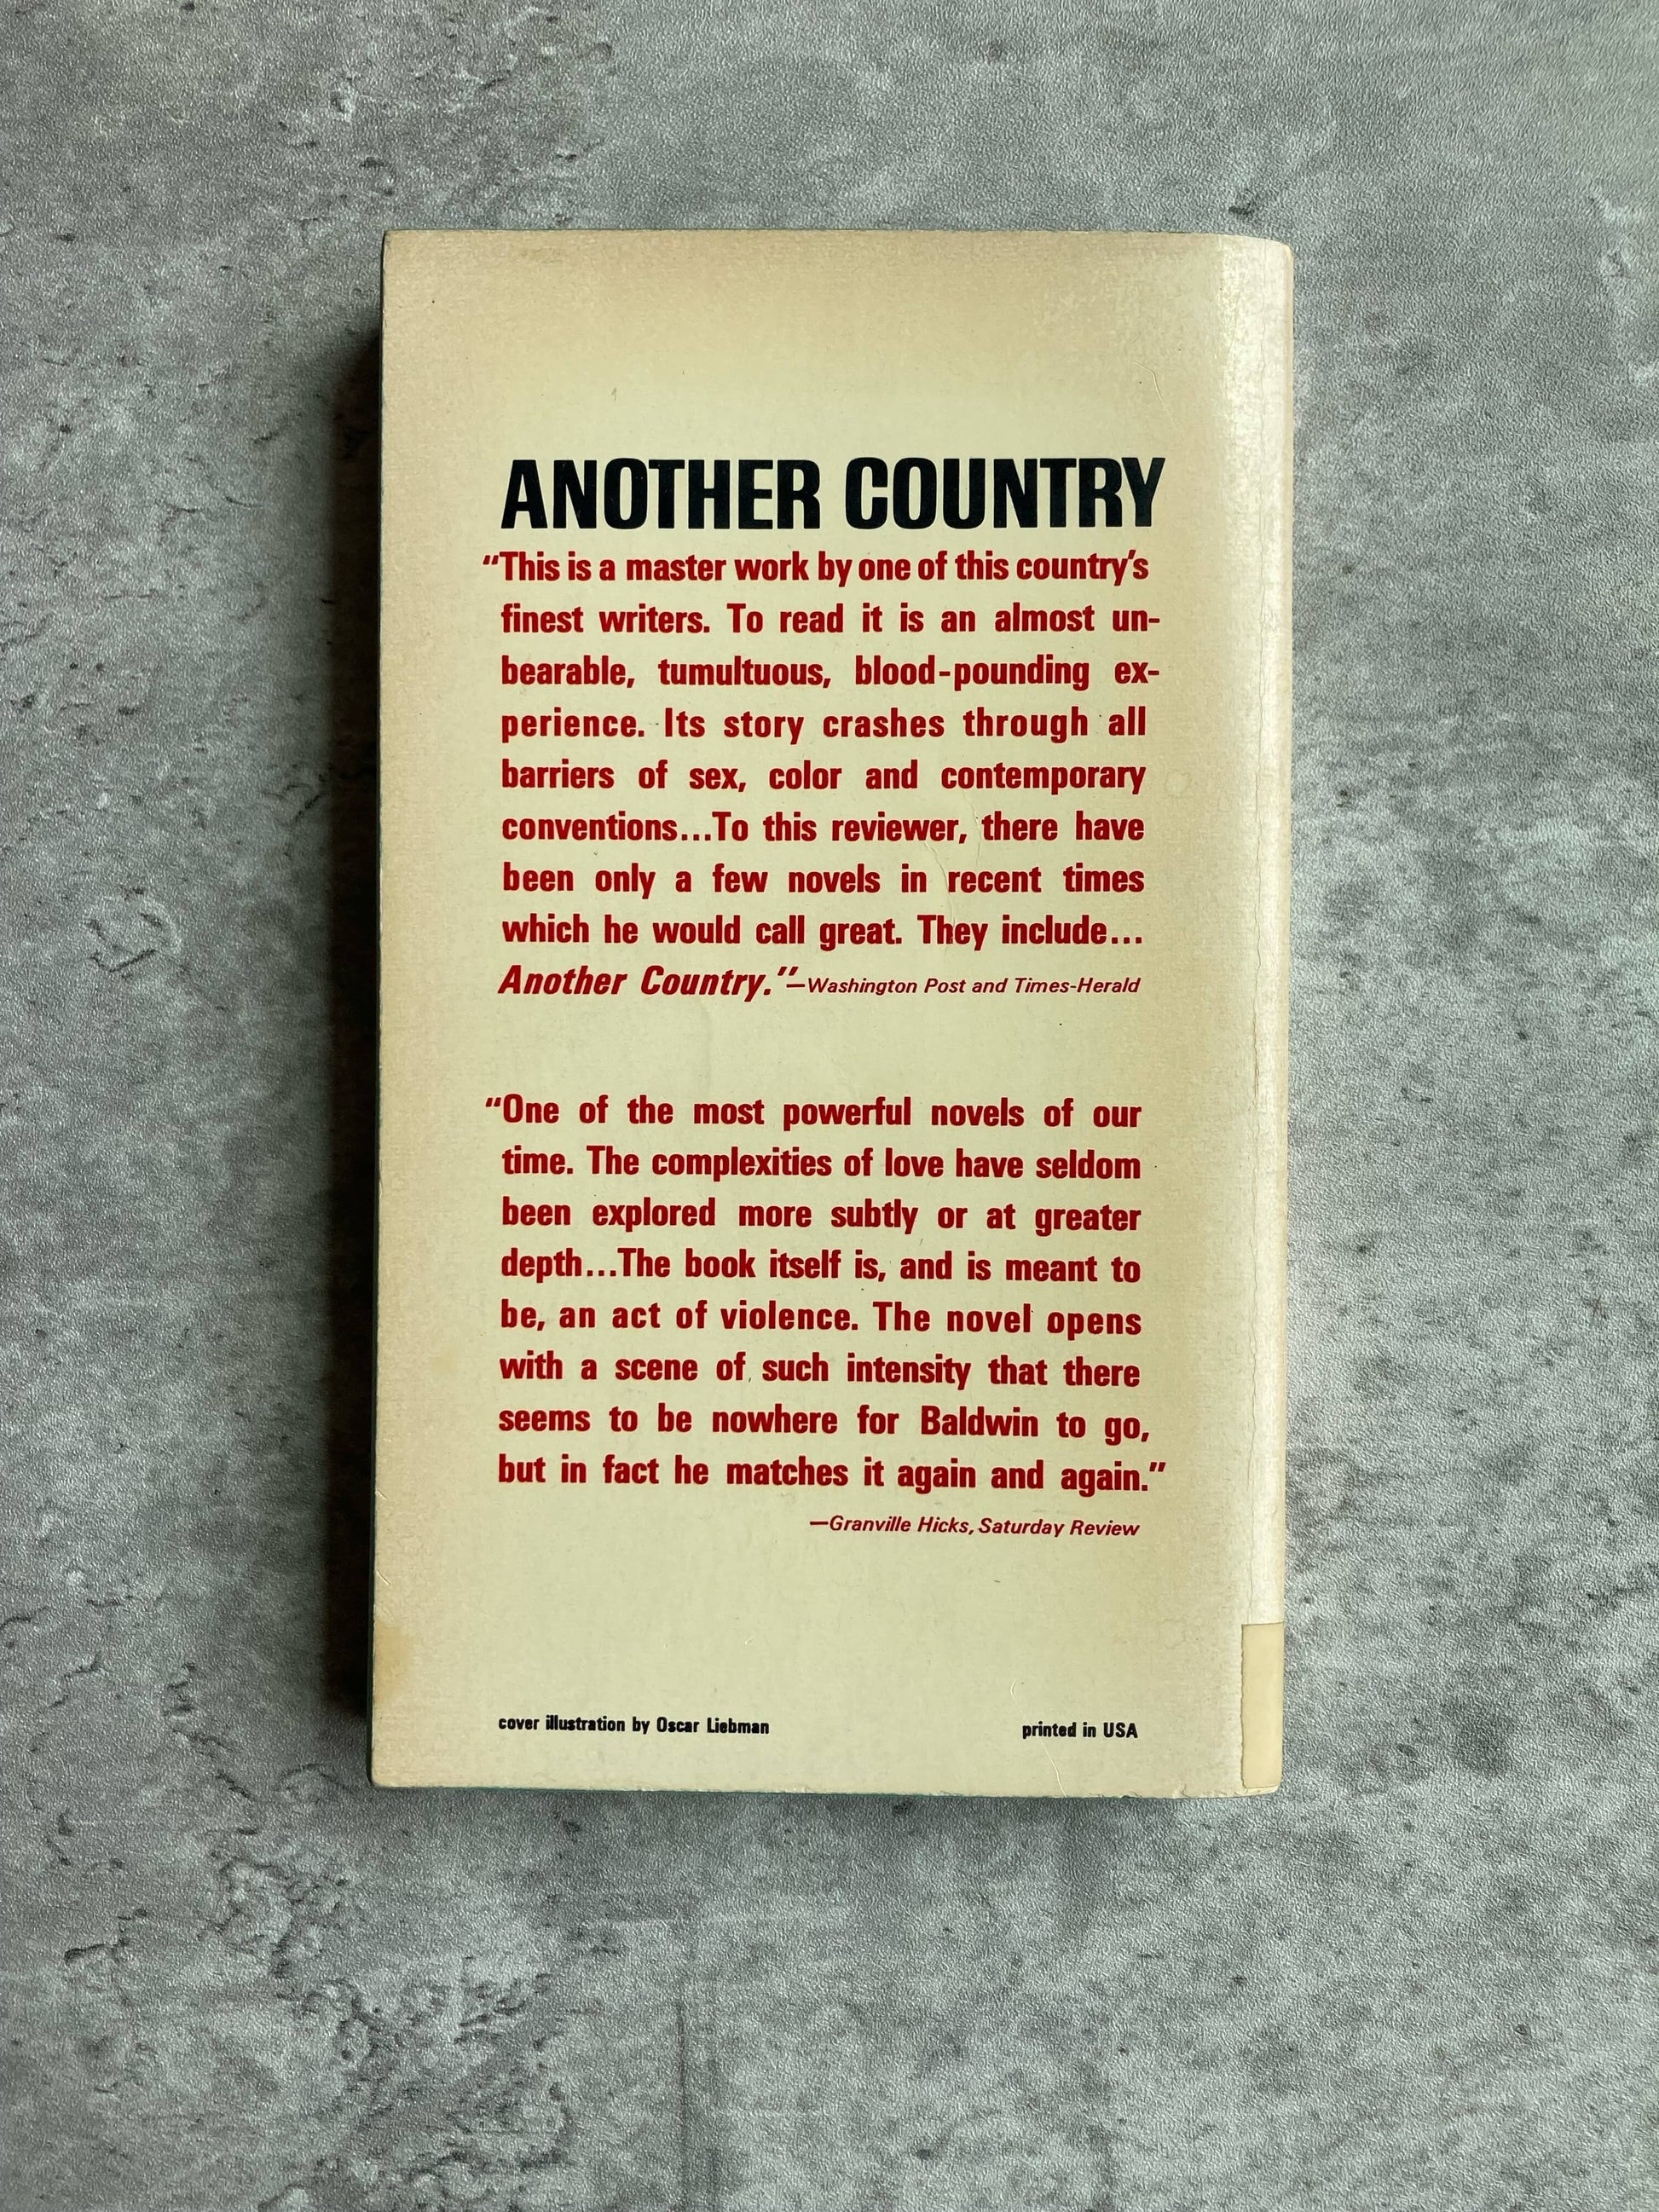 Back cover of James Baldwin's Another Country.  Shop for books with The Stone Circle, the only online bookstore near you.